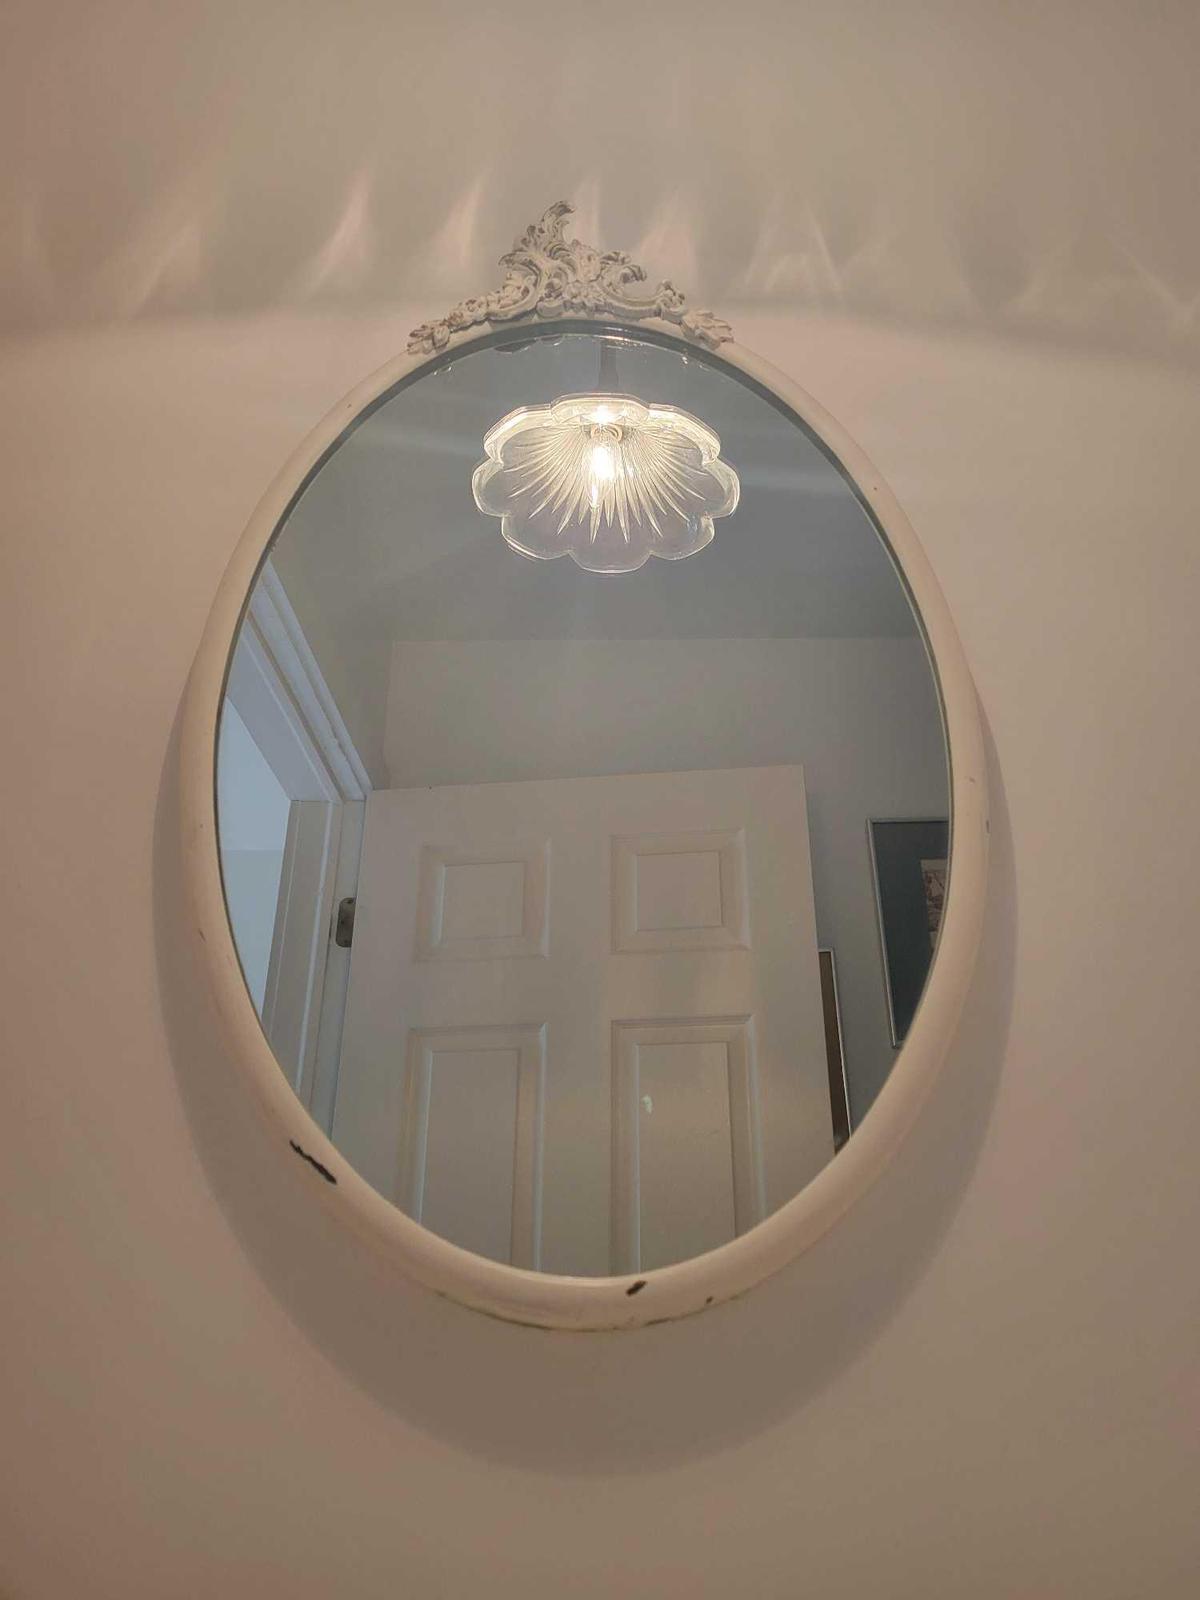 Oval Mirror $5 STS